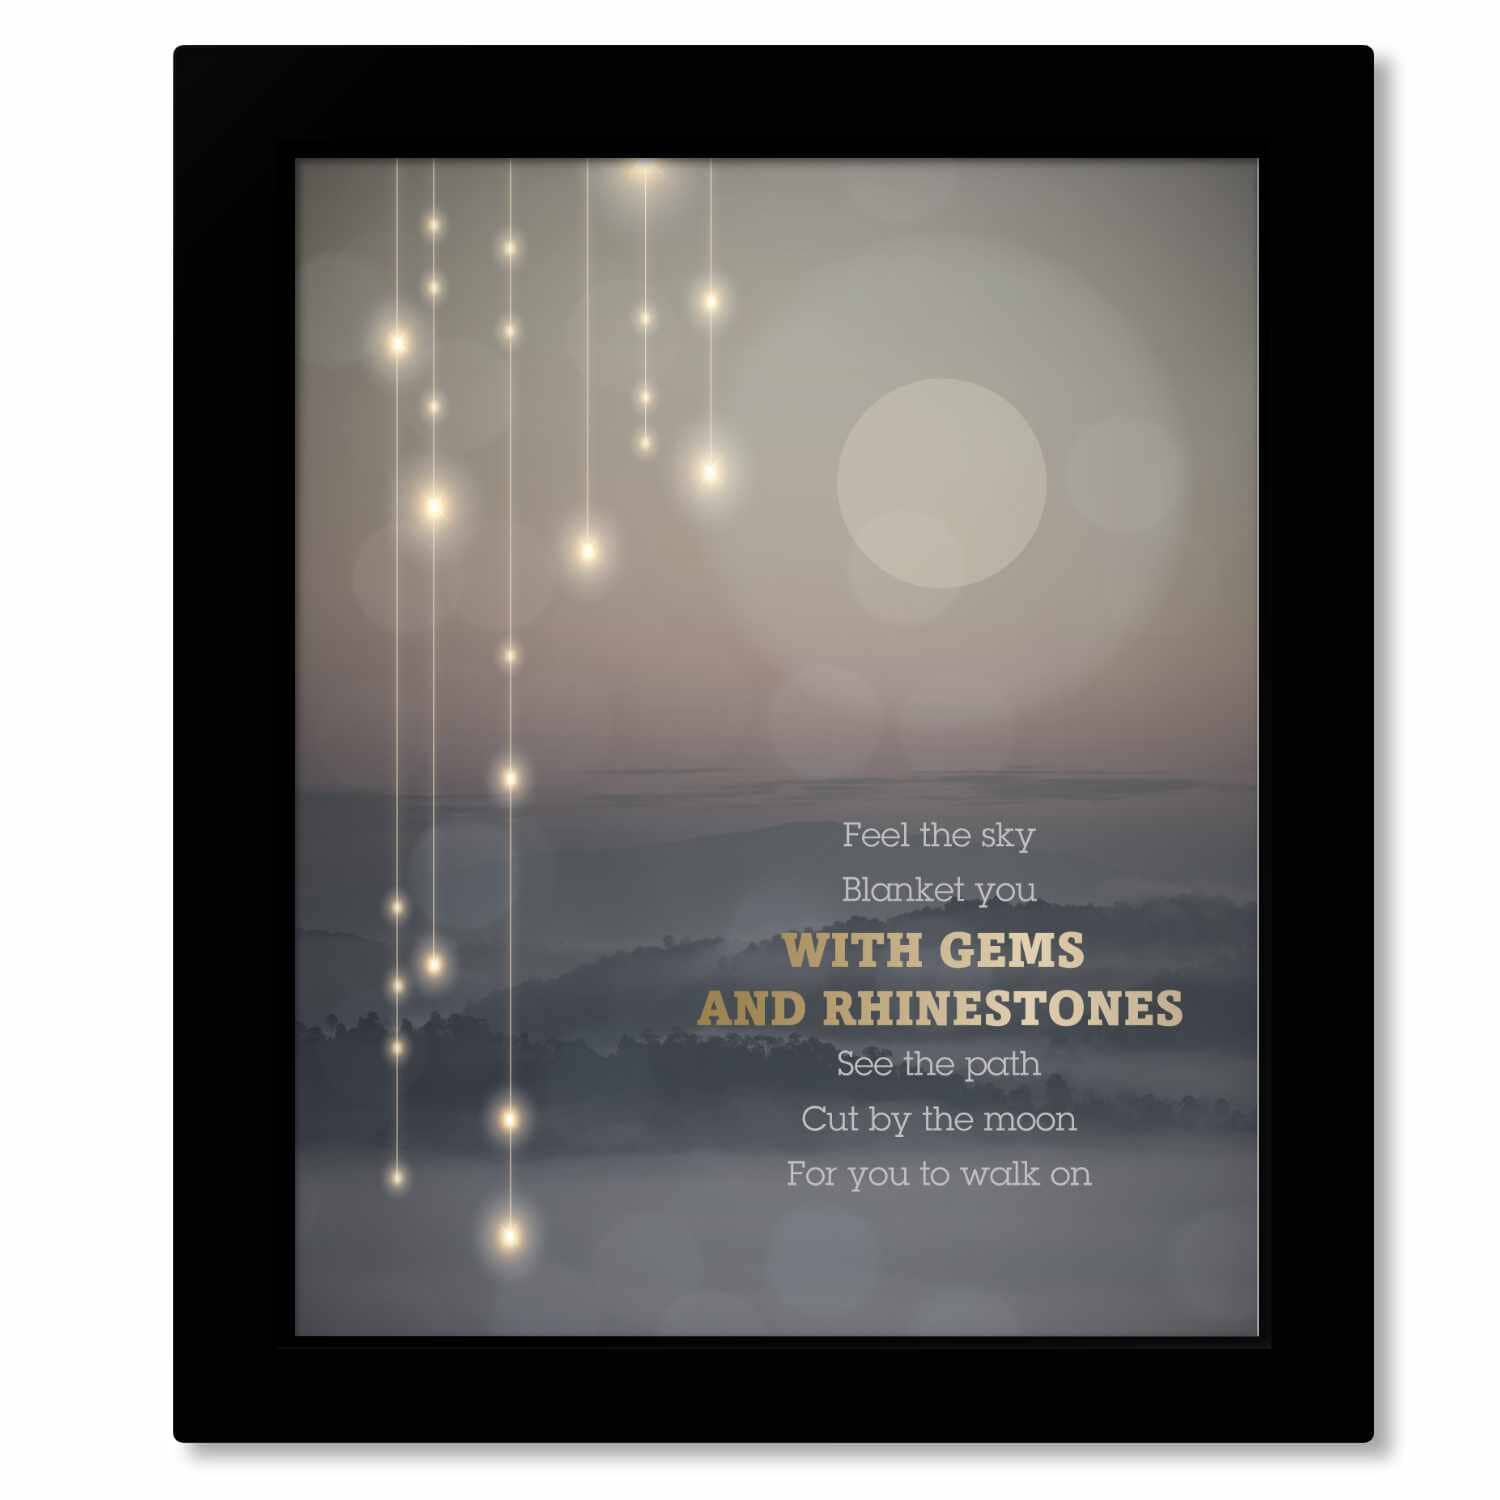 Unknown Thought by Pearl Jam - Song Lyric Art Memorabilia Song Lyrics Art Song Lyrics Art 8x10 Framed Print (without mat) 